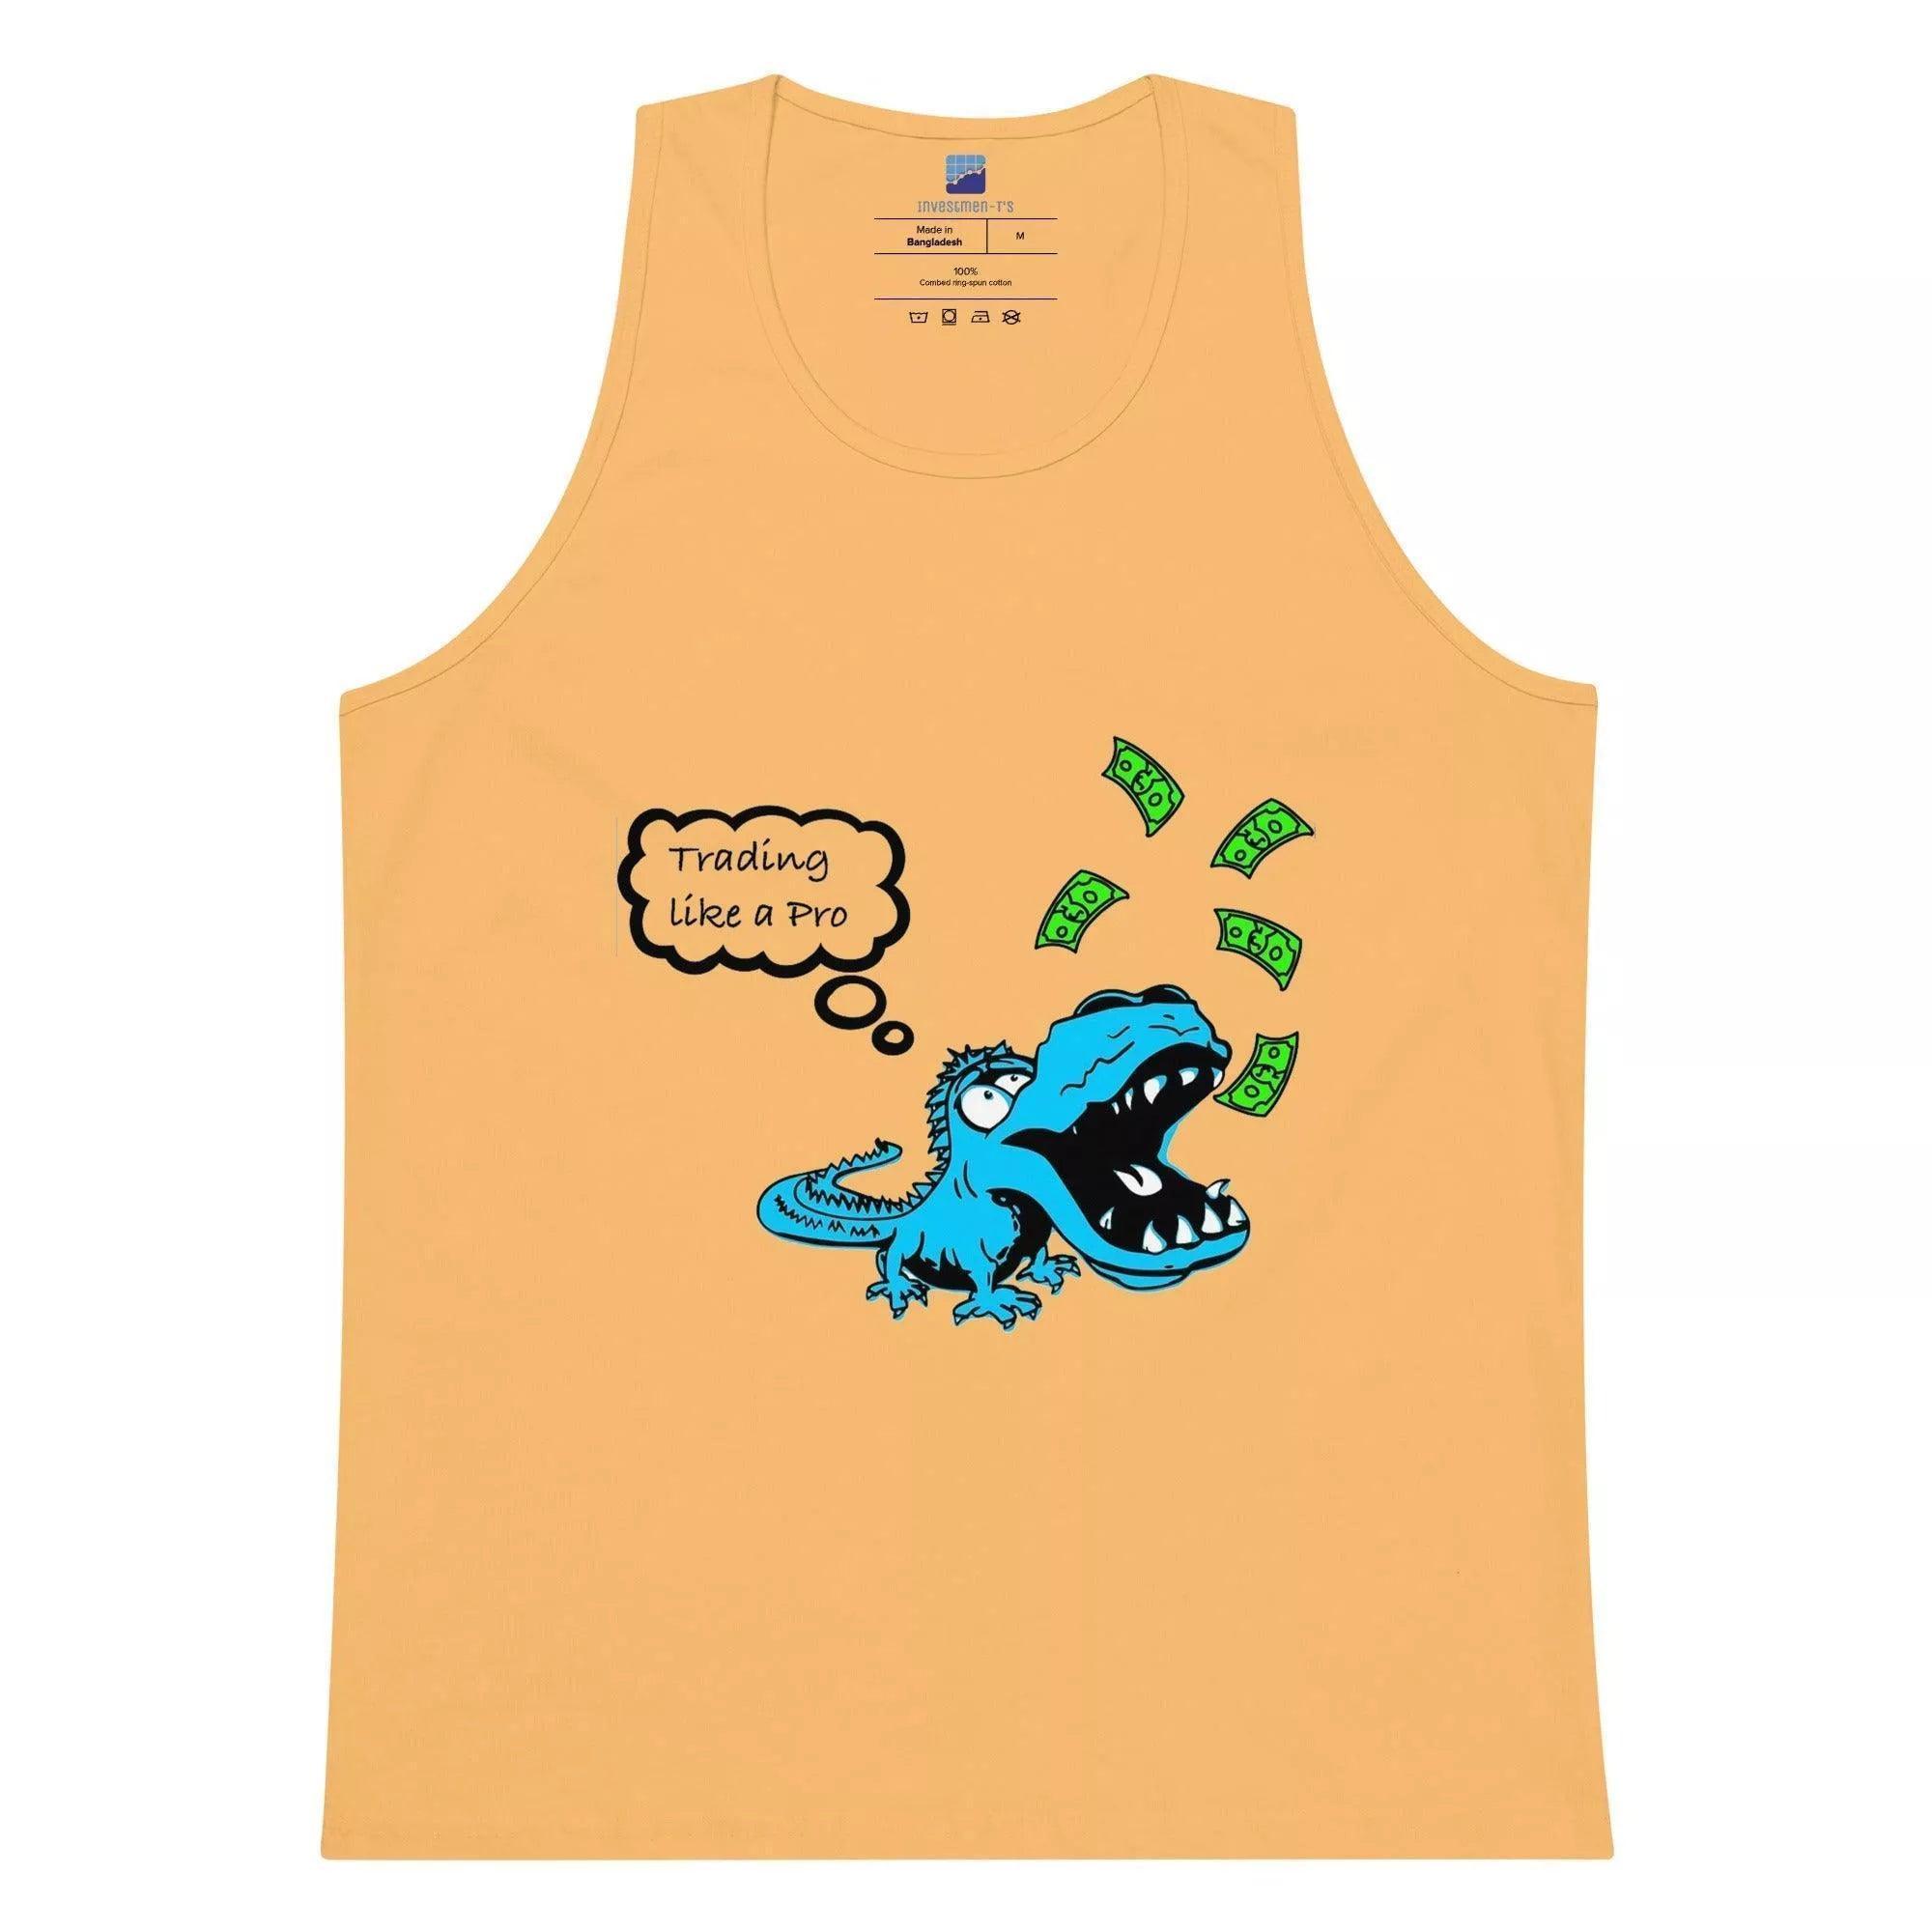 Trading Like a Pro Tank Top - InvestmenTees